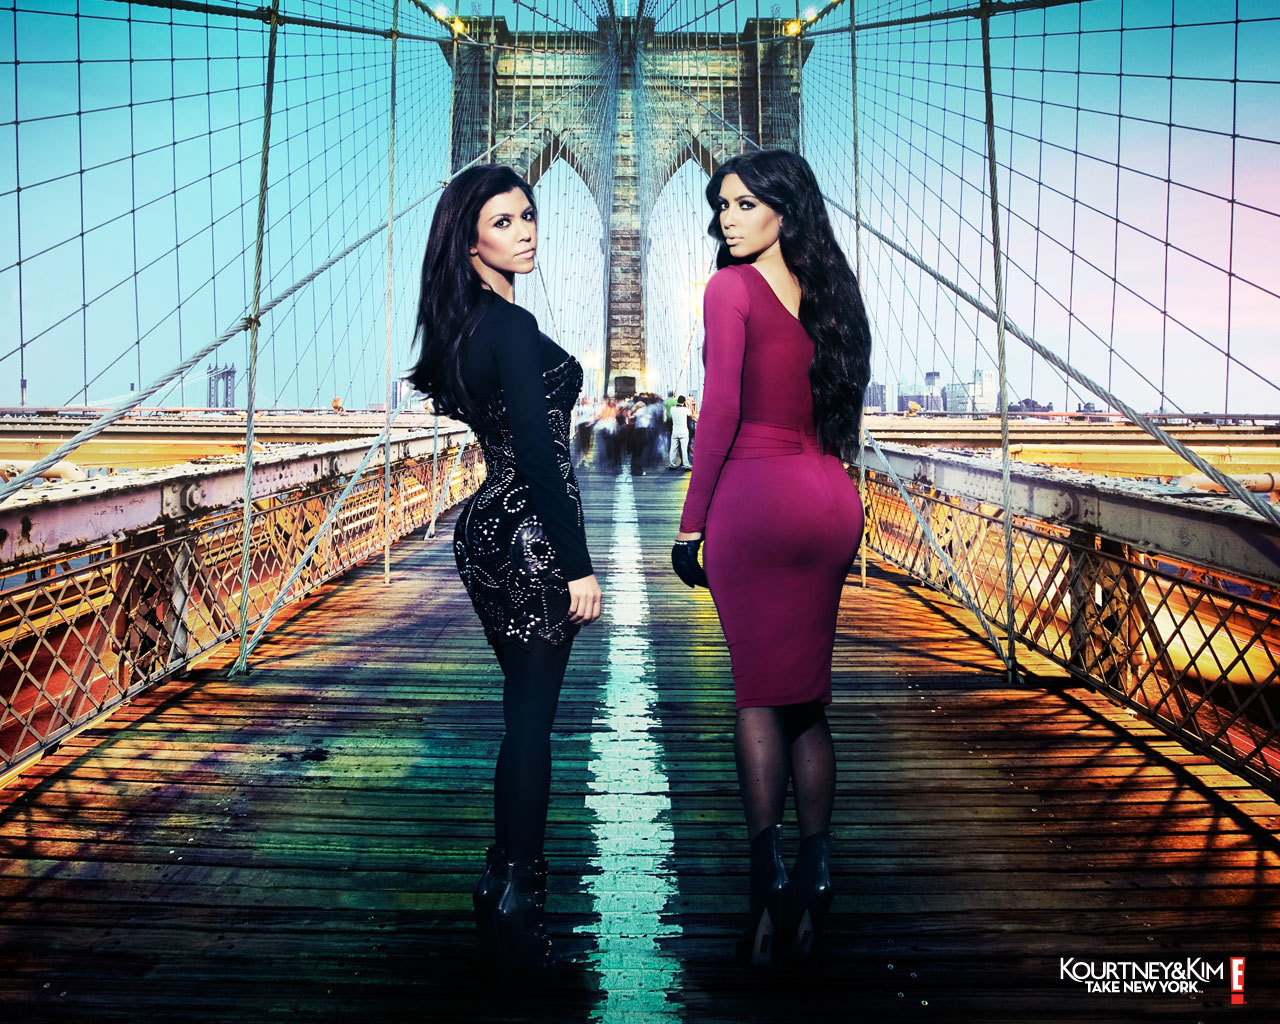 Keeping Up With The Kardashians Image Kktny HD Wallpaper And